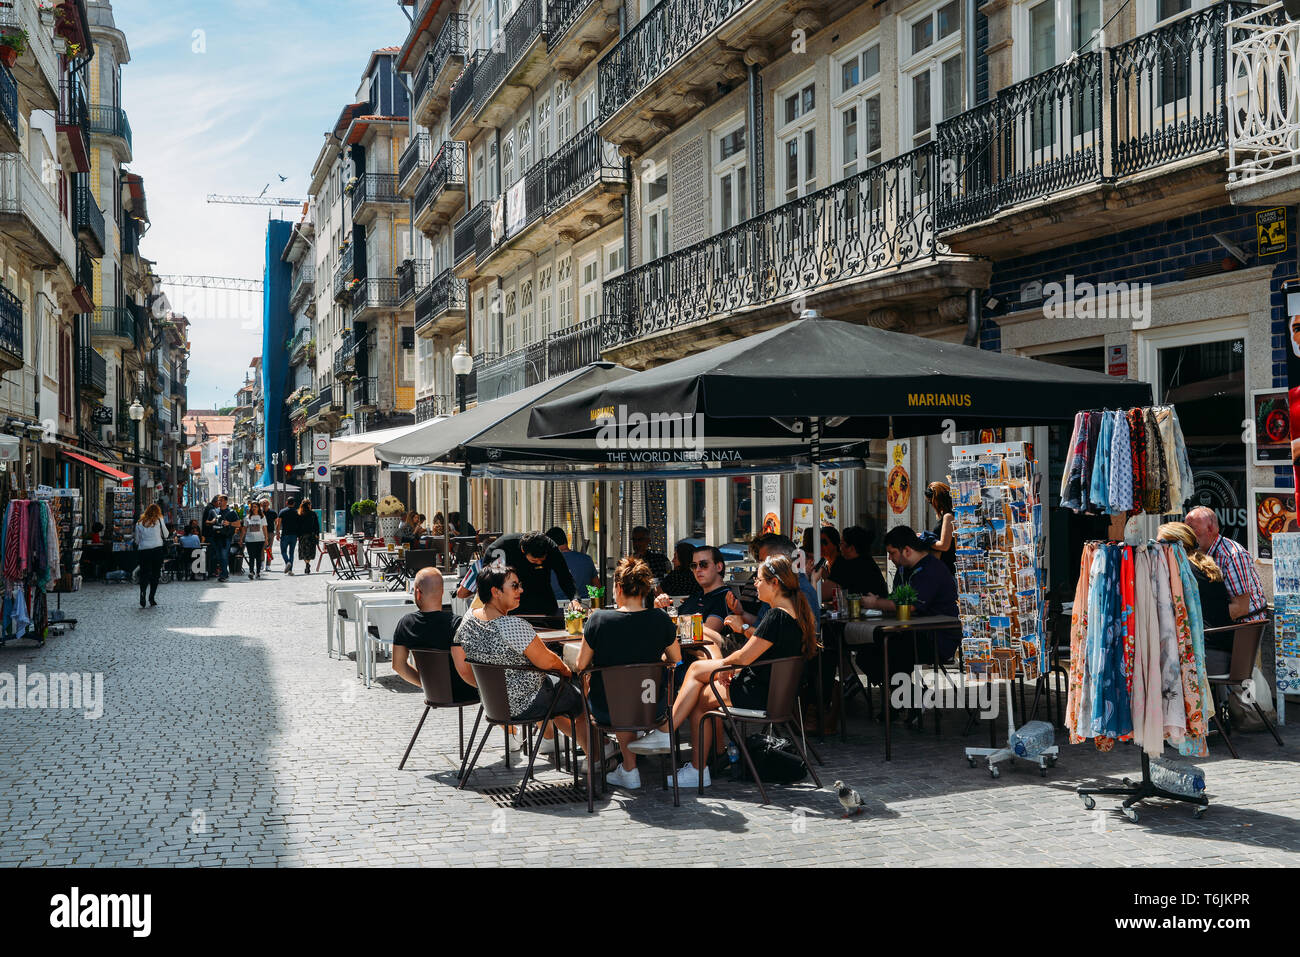 Porto, Portugal - April 29, 2019: People sit at cafe terraces on a sunny afternoon in the historic centre of Porto - UNESCO World Heritage Site Stock Photo